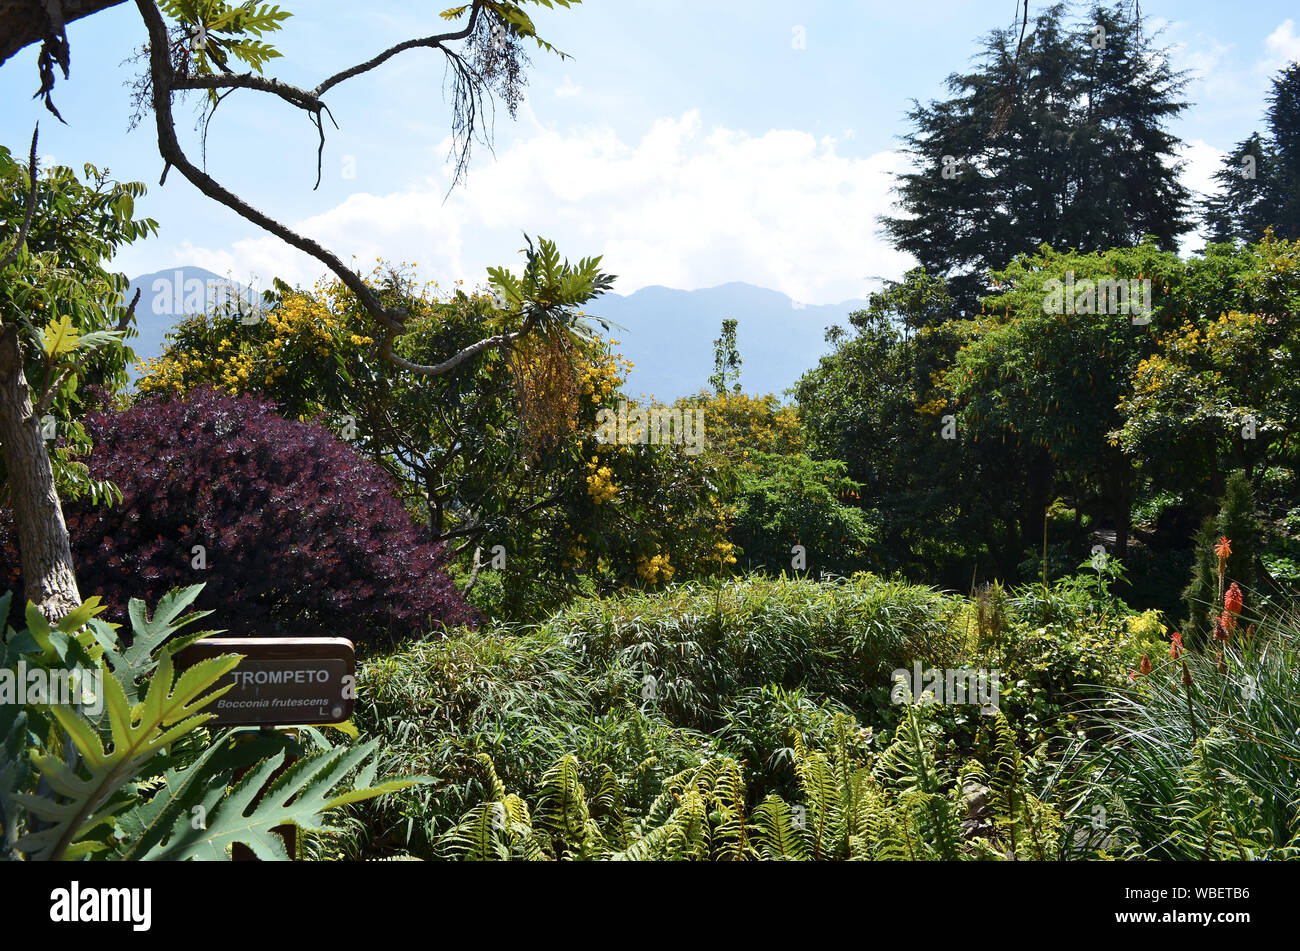 BOGOTA, COLOMBIA - JANUARY 25, 2014: Gardens at the top of Monserrate. Stock Photo